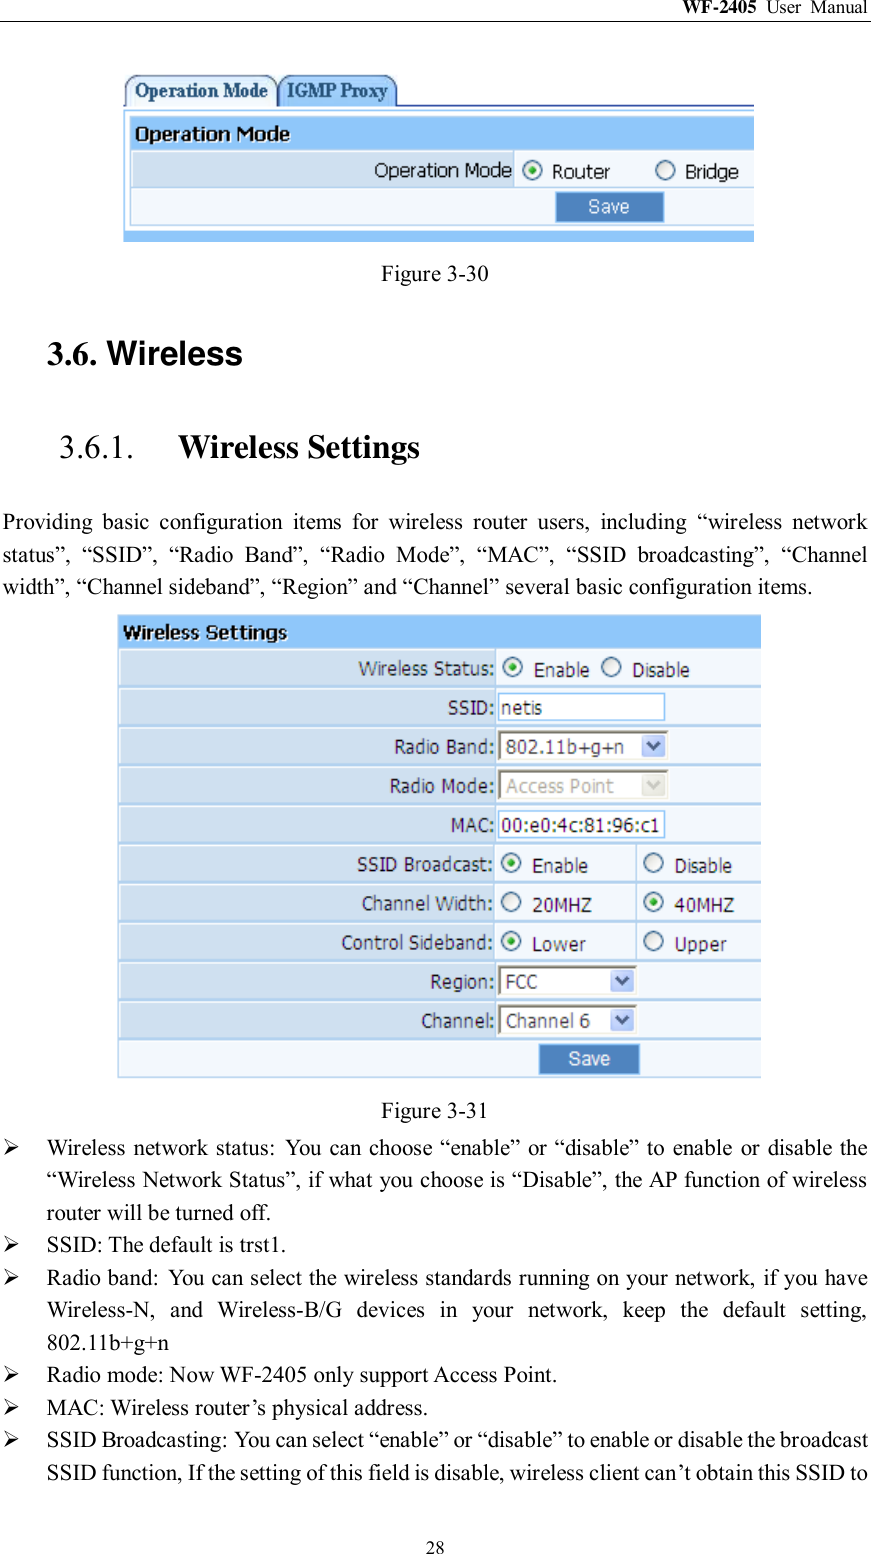 WF-2405  User  Manual  28  Figure 3-30 3.6. Wireless 3.6.1. Wireless Settings Providing  basic  configuration  items  for  wireless  router  users,  including  “wireless  network status”,  “SSID”,  “Radio  Band”,  “Radio  Mode”,  “MAC”,  “SSID  broadcasting”,  “Channel width”, “Channel sideband”, “Region” and “Channel” several basic configuration items.  Figure 3-31  Wireless network status:  You can choose “enable” or “disable” to  enable  or disable the “Wireless Network Status”, if what you choose is “Disable”, the AP function of wireless router will be turned off.  SSID: The default is trst1.  Radio band:  You can select the wireless standards running on your network, if you have Wireless-N,  and  Wireless-B/G  devices  in  your  network,  keep  the  default  setting, 802.11b+g+n  Radio mode: Now WF-2405 only support Access Point.  MAC: Wireless router‟s physical address.  SSID Broadcasting: You can select “enable” or “disable” to enable or disable the broadcast SSID function, If the setting of this field is disable, wireless client can‟t obtain this SSID to 